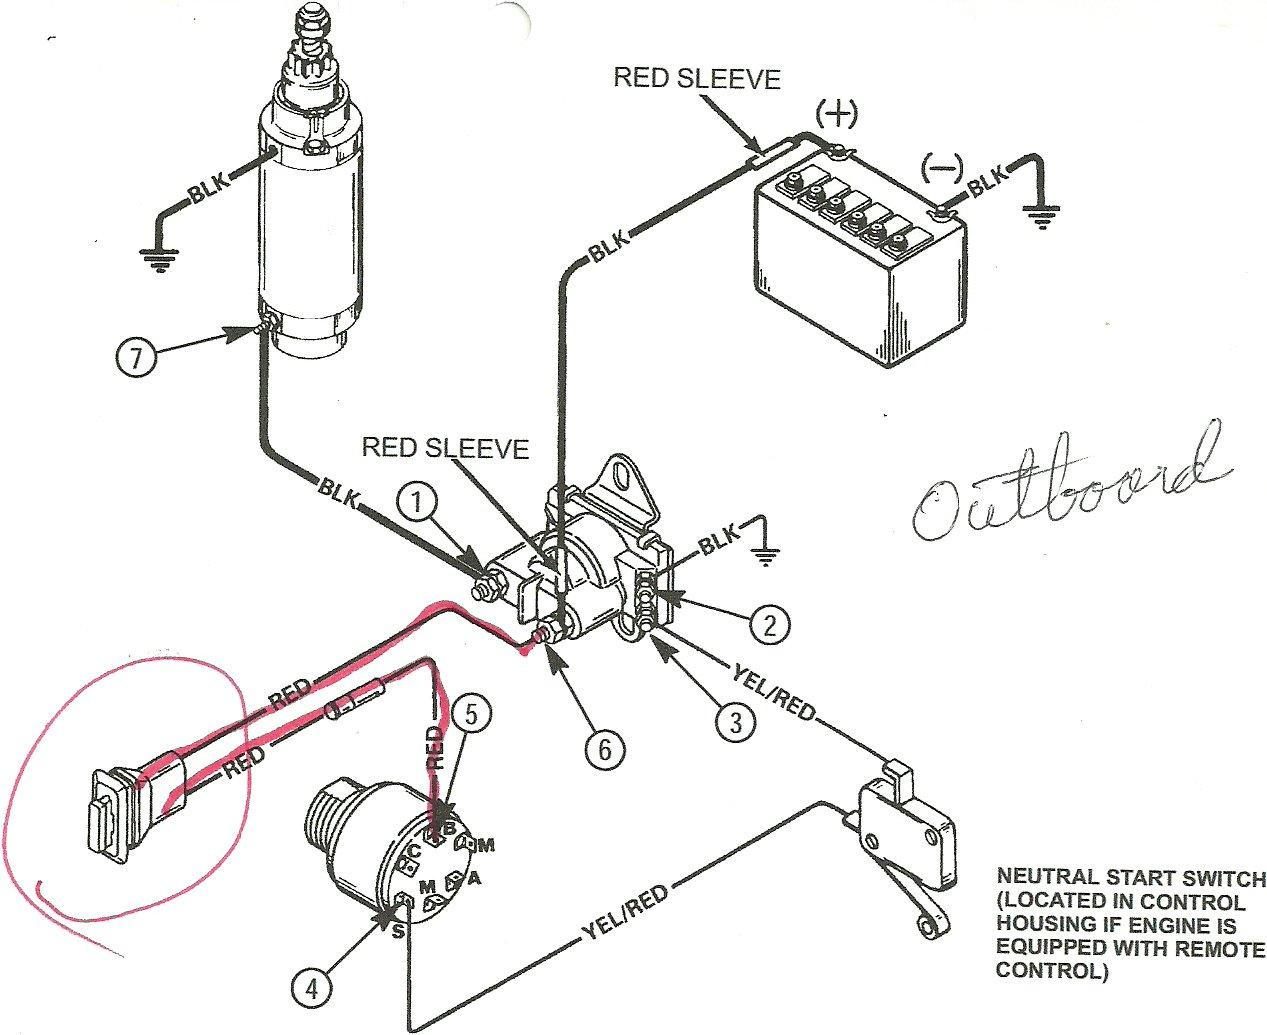 Yamaha Outboard Ignition Switch Wiring Diagram - Trusted Wiring - Yamaha Outboard Wiring Diagram Pdf